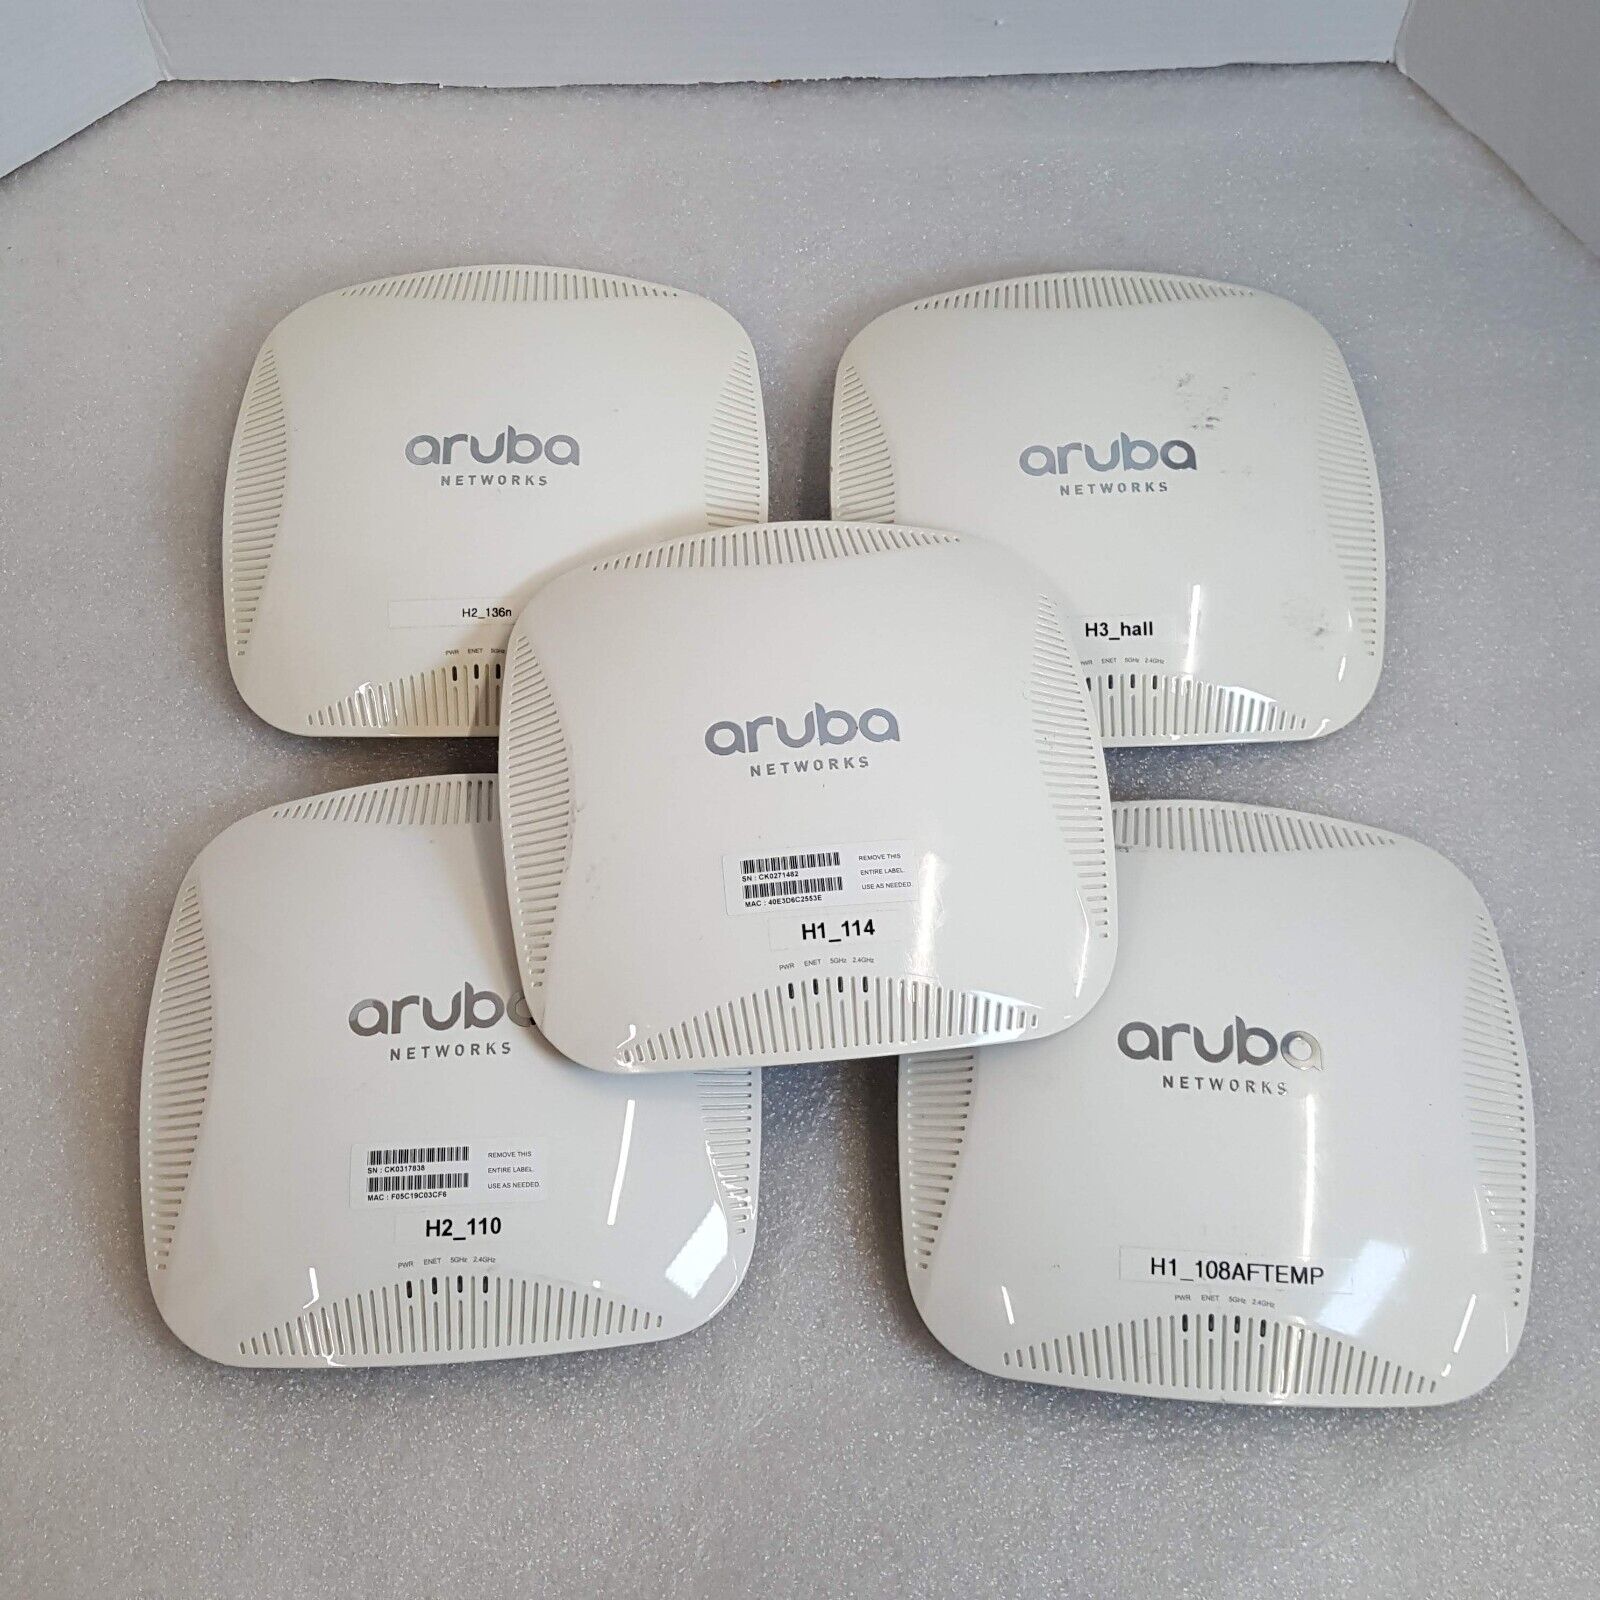 LOT OF 5 Aruba Networks APIN0215 2.4 GHz 5 GHz Controller-Managed Access Point